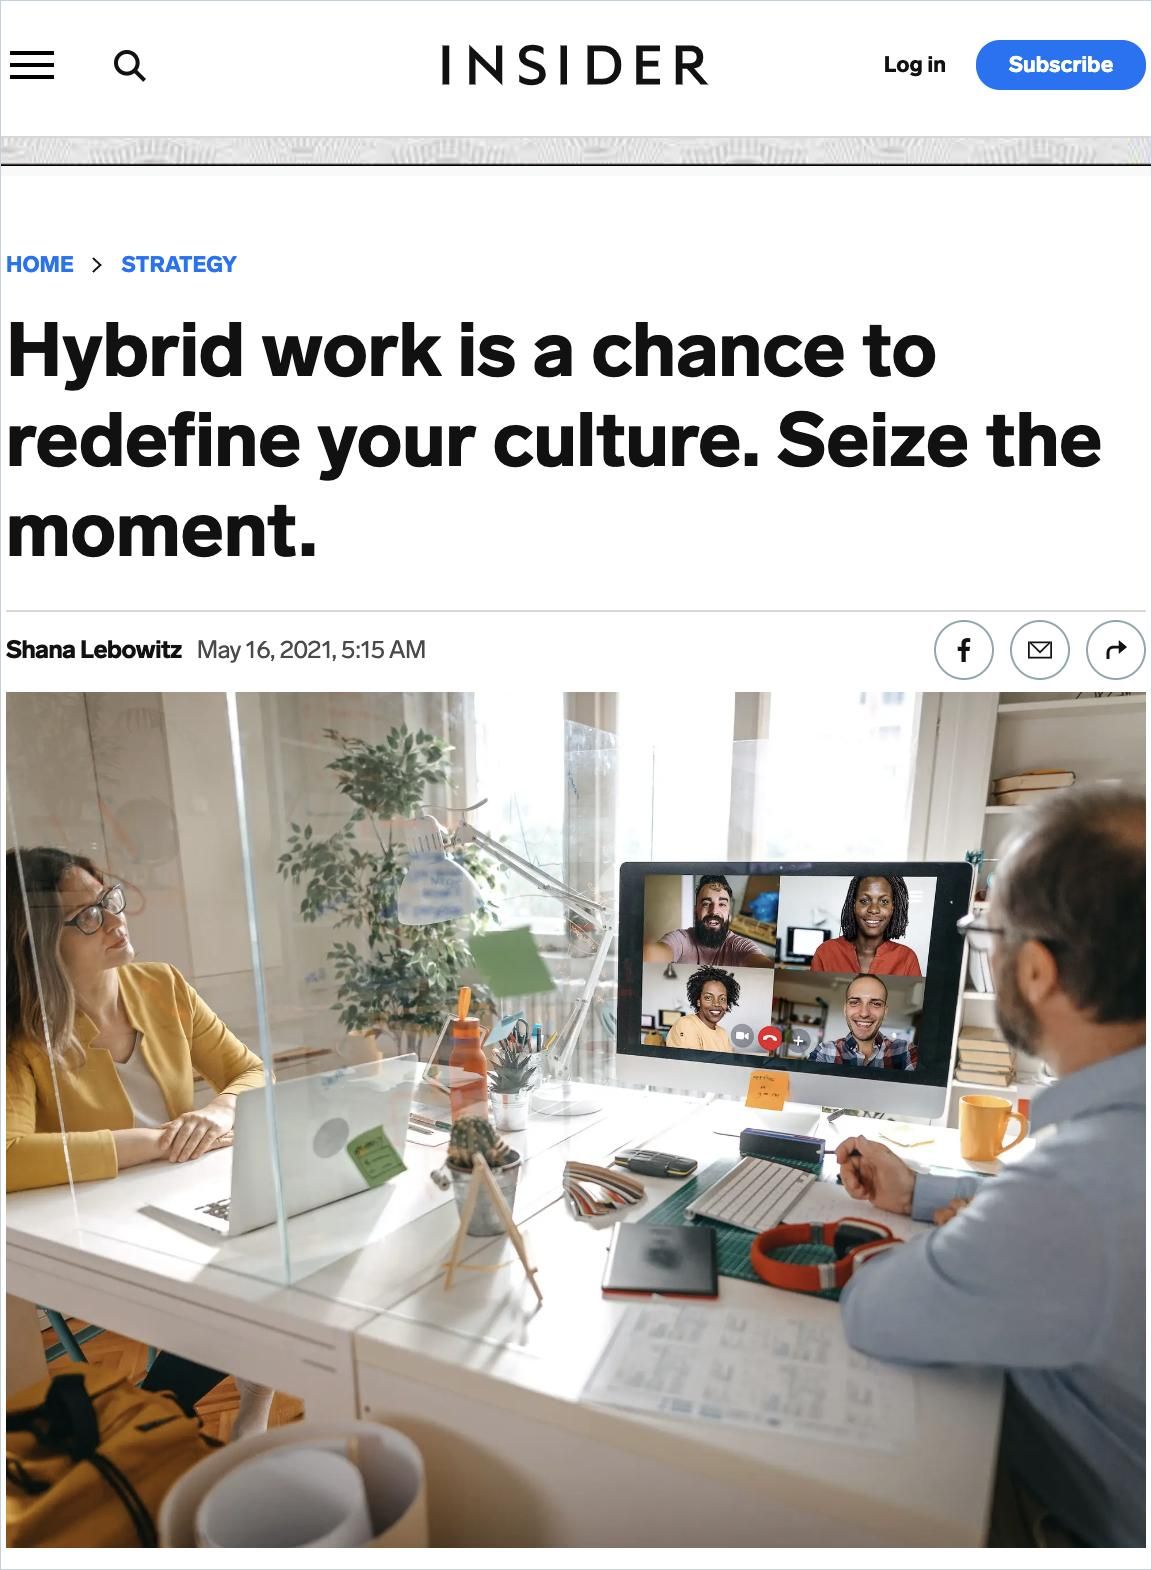 Image of: Hybrid work is a chance to redefine your culture. Seize the moment.